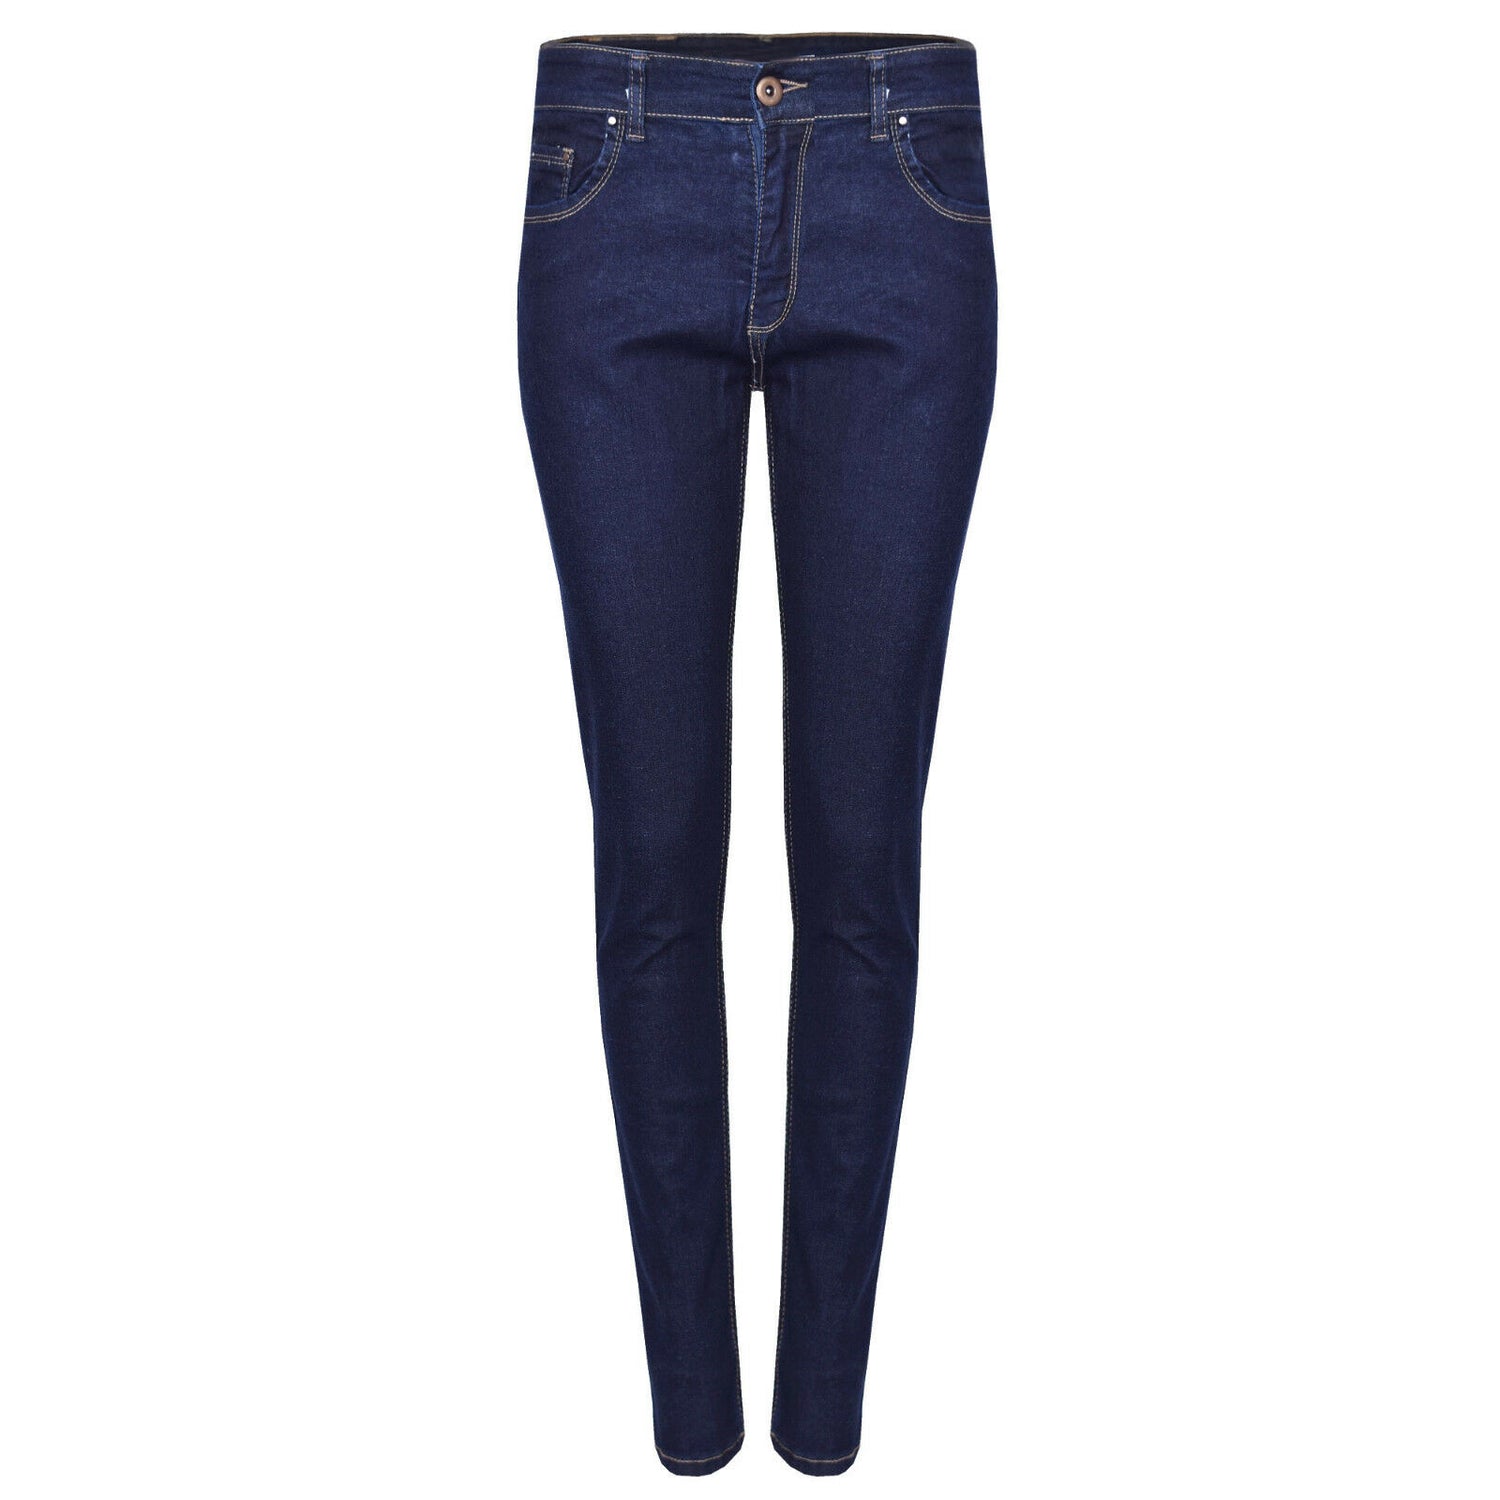 Buy DRRAGON Women Blue Slim fit Jeans Online at Low Prices in India -  Paytmmall.com